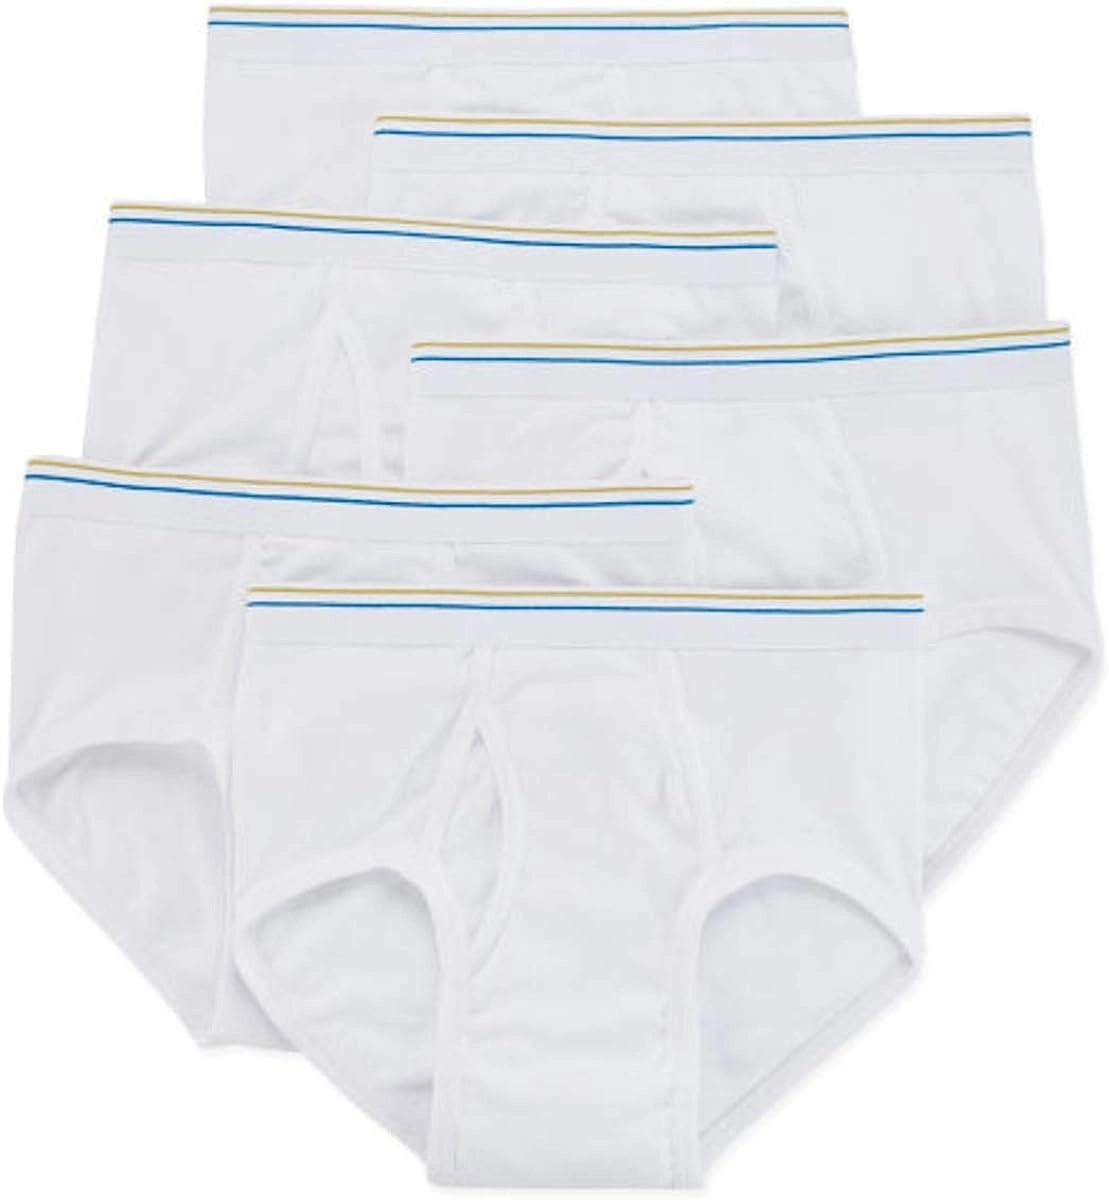 Mens Tag Free Boxer Briefs From Bangladesh Underwear Factory